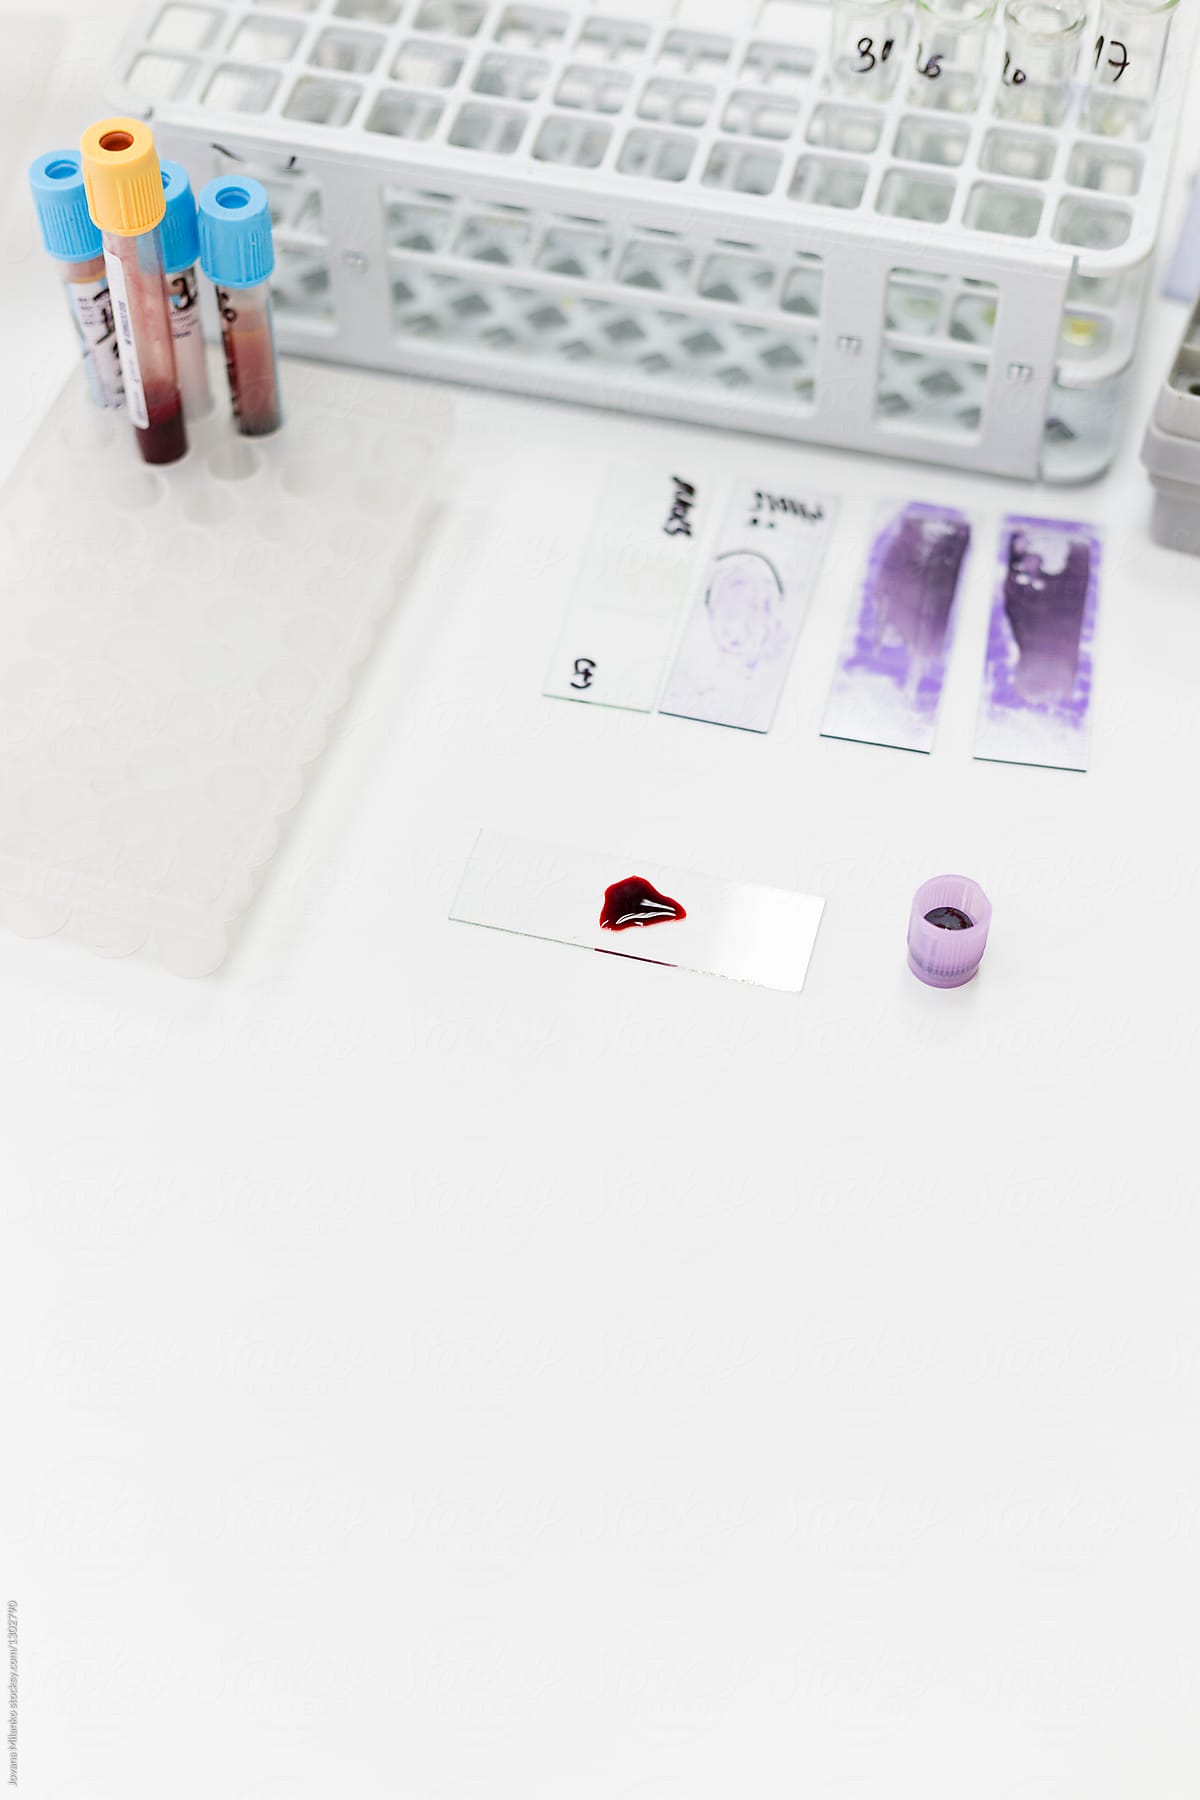 Blood samples being tested in a lab